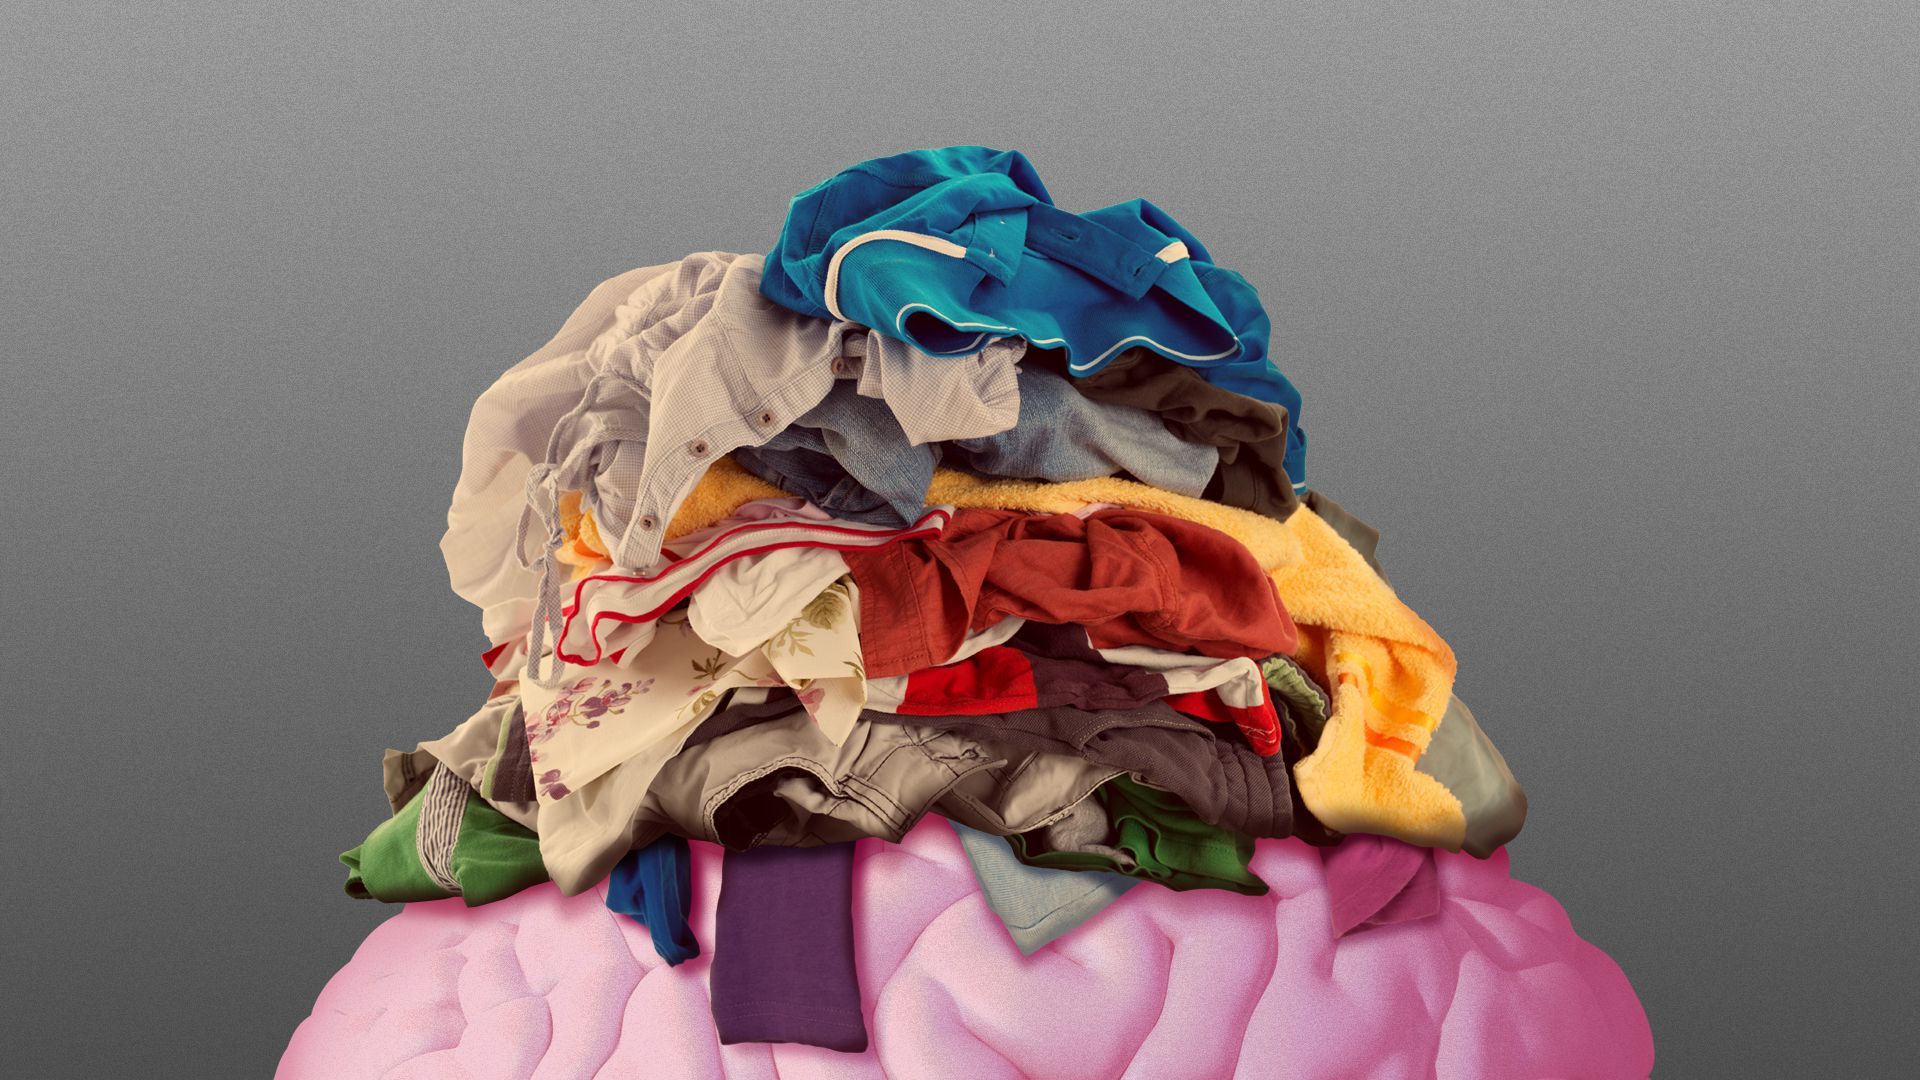 Illustration of a pile of dirty laundry sitting on top of a brain